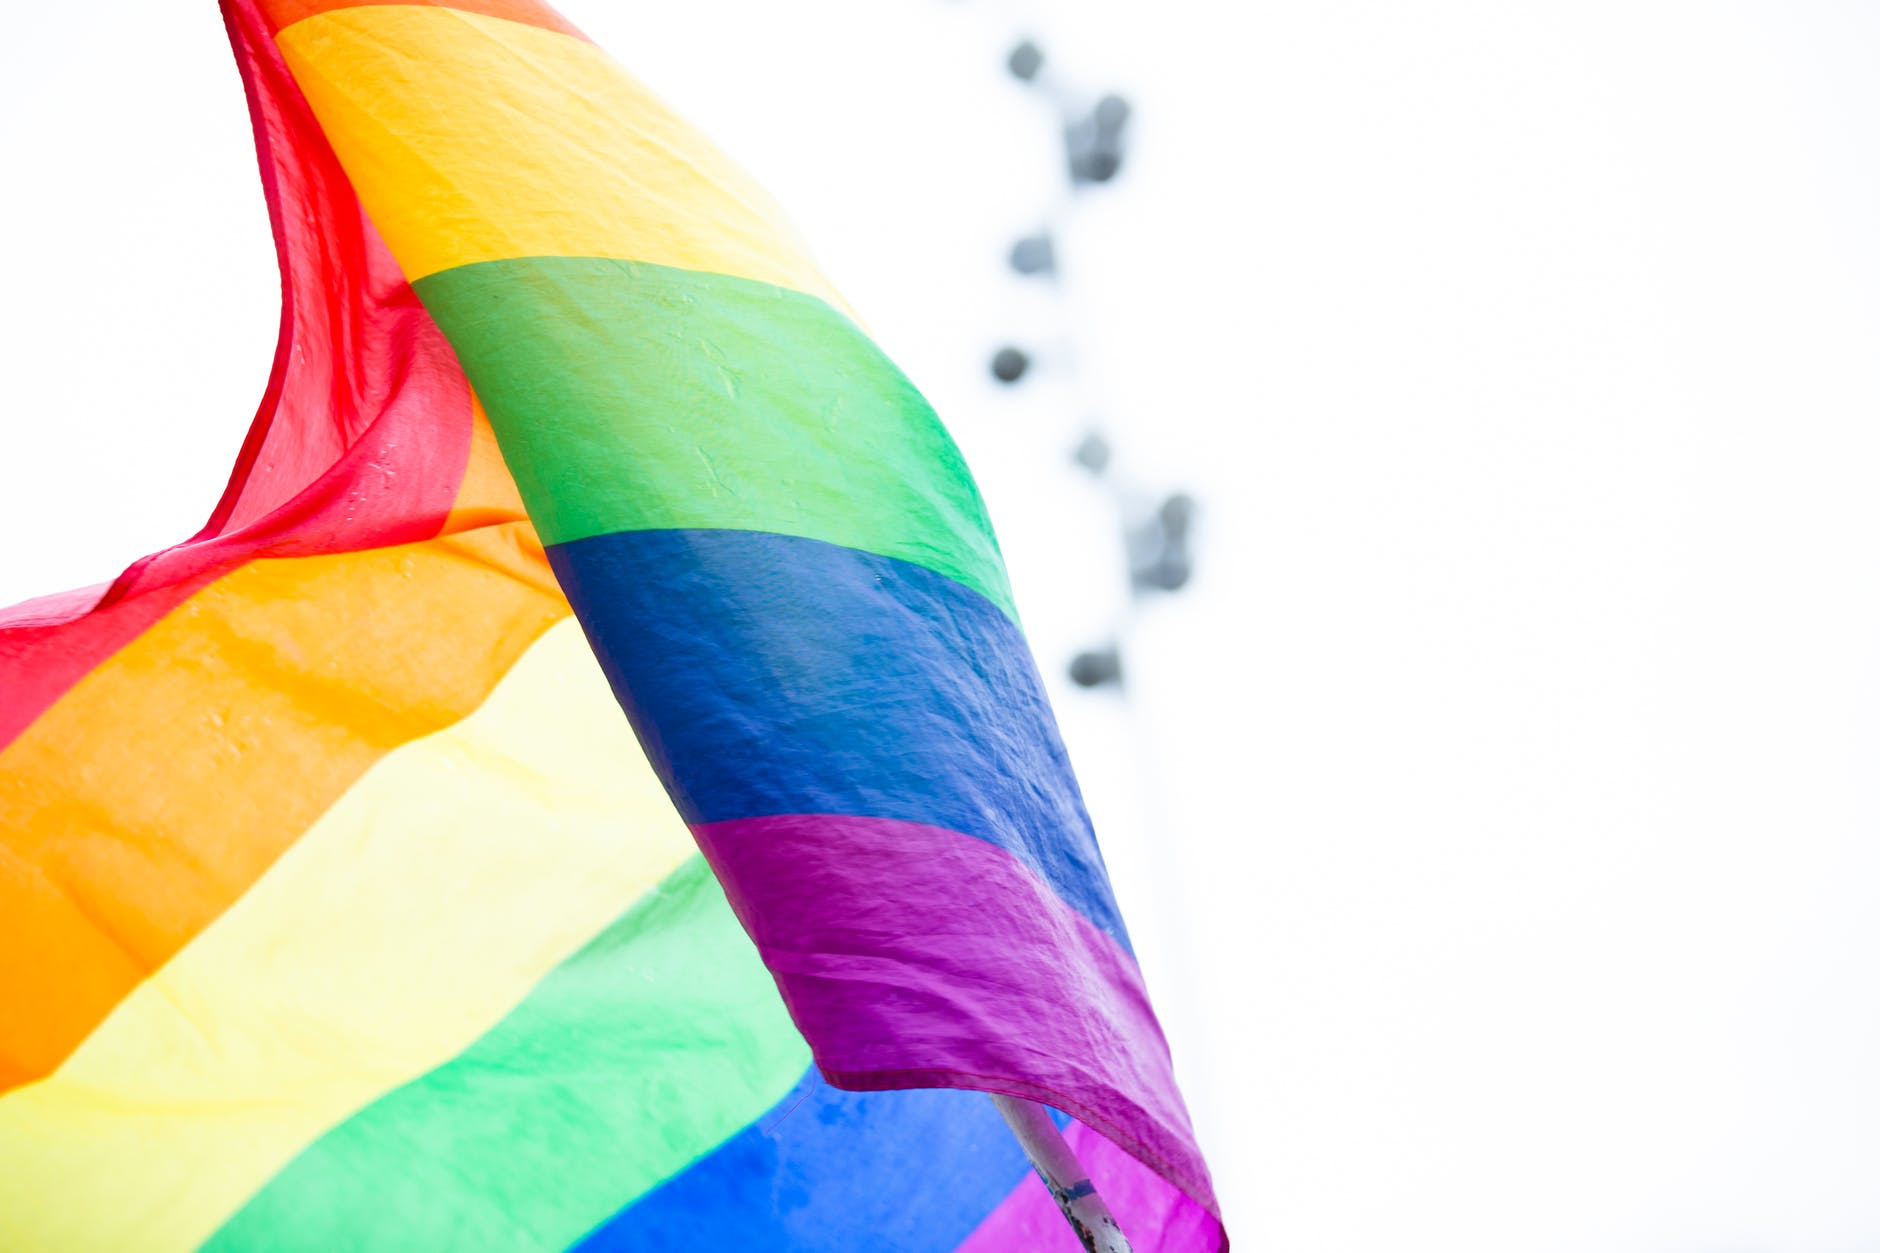 How did the rainbow get associated with the LGBTQ community?